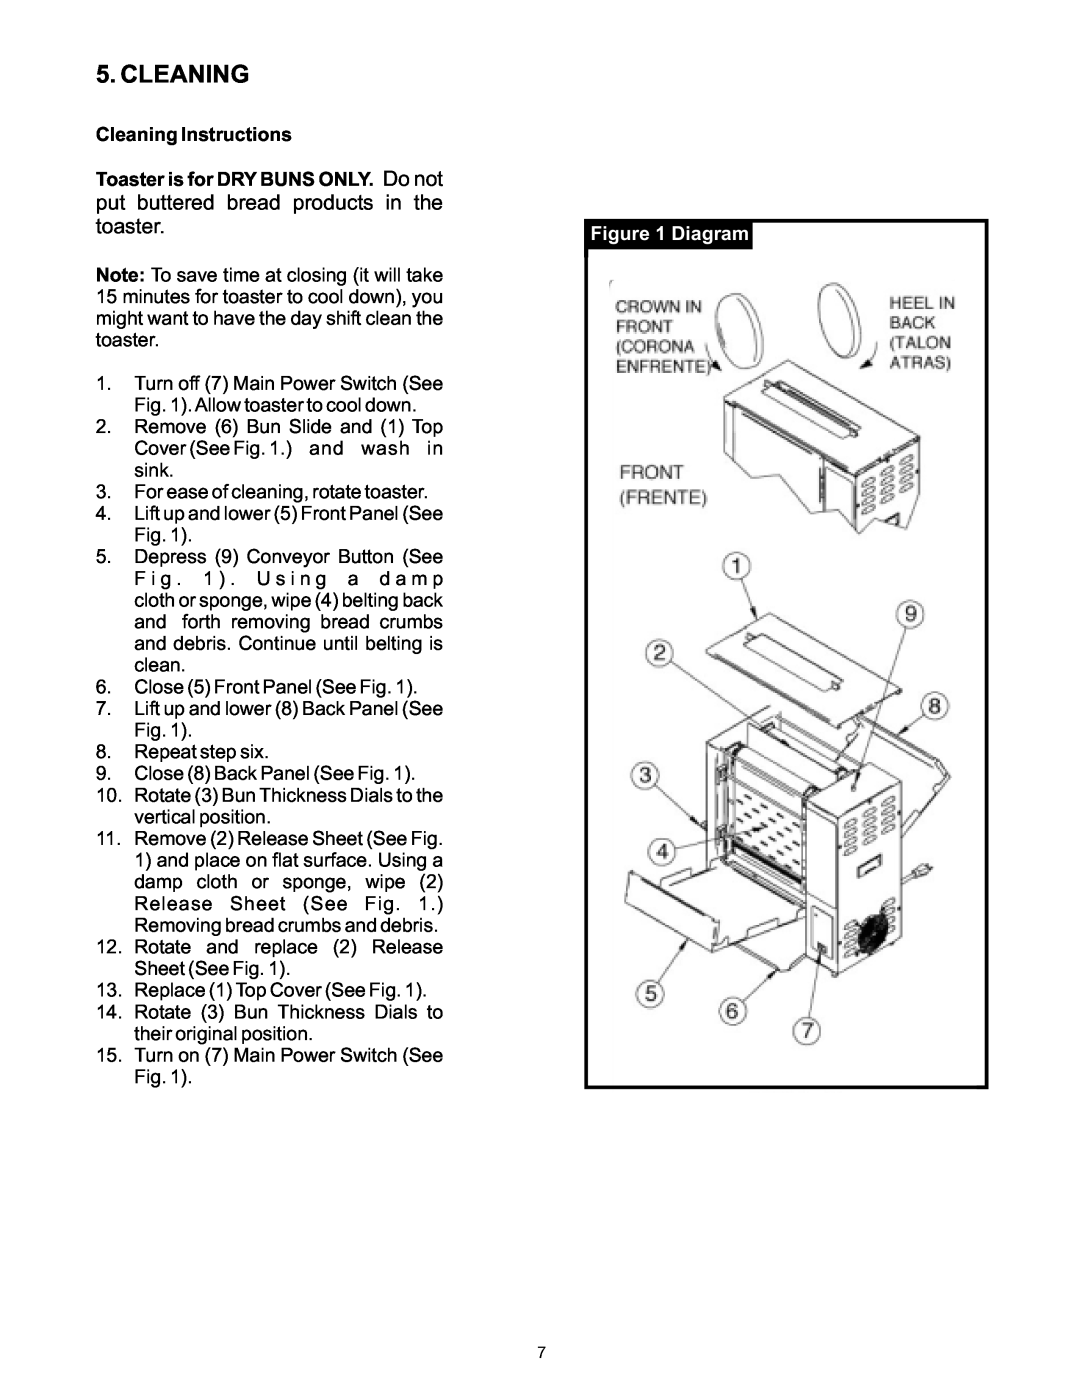 APW Wyott VCG operating instructions Cleaning Instructions, Diagram 